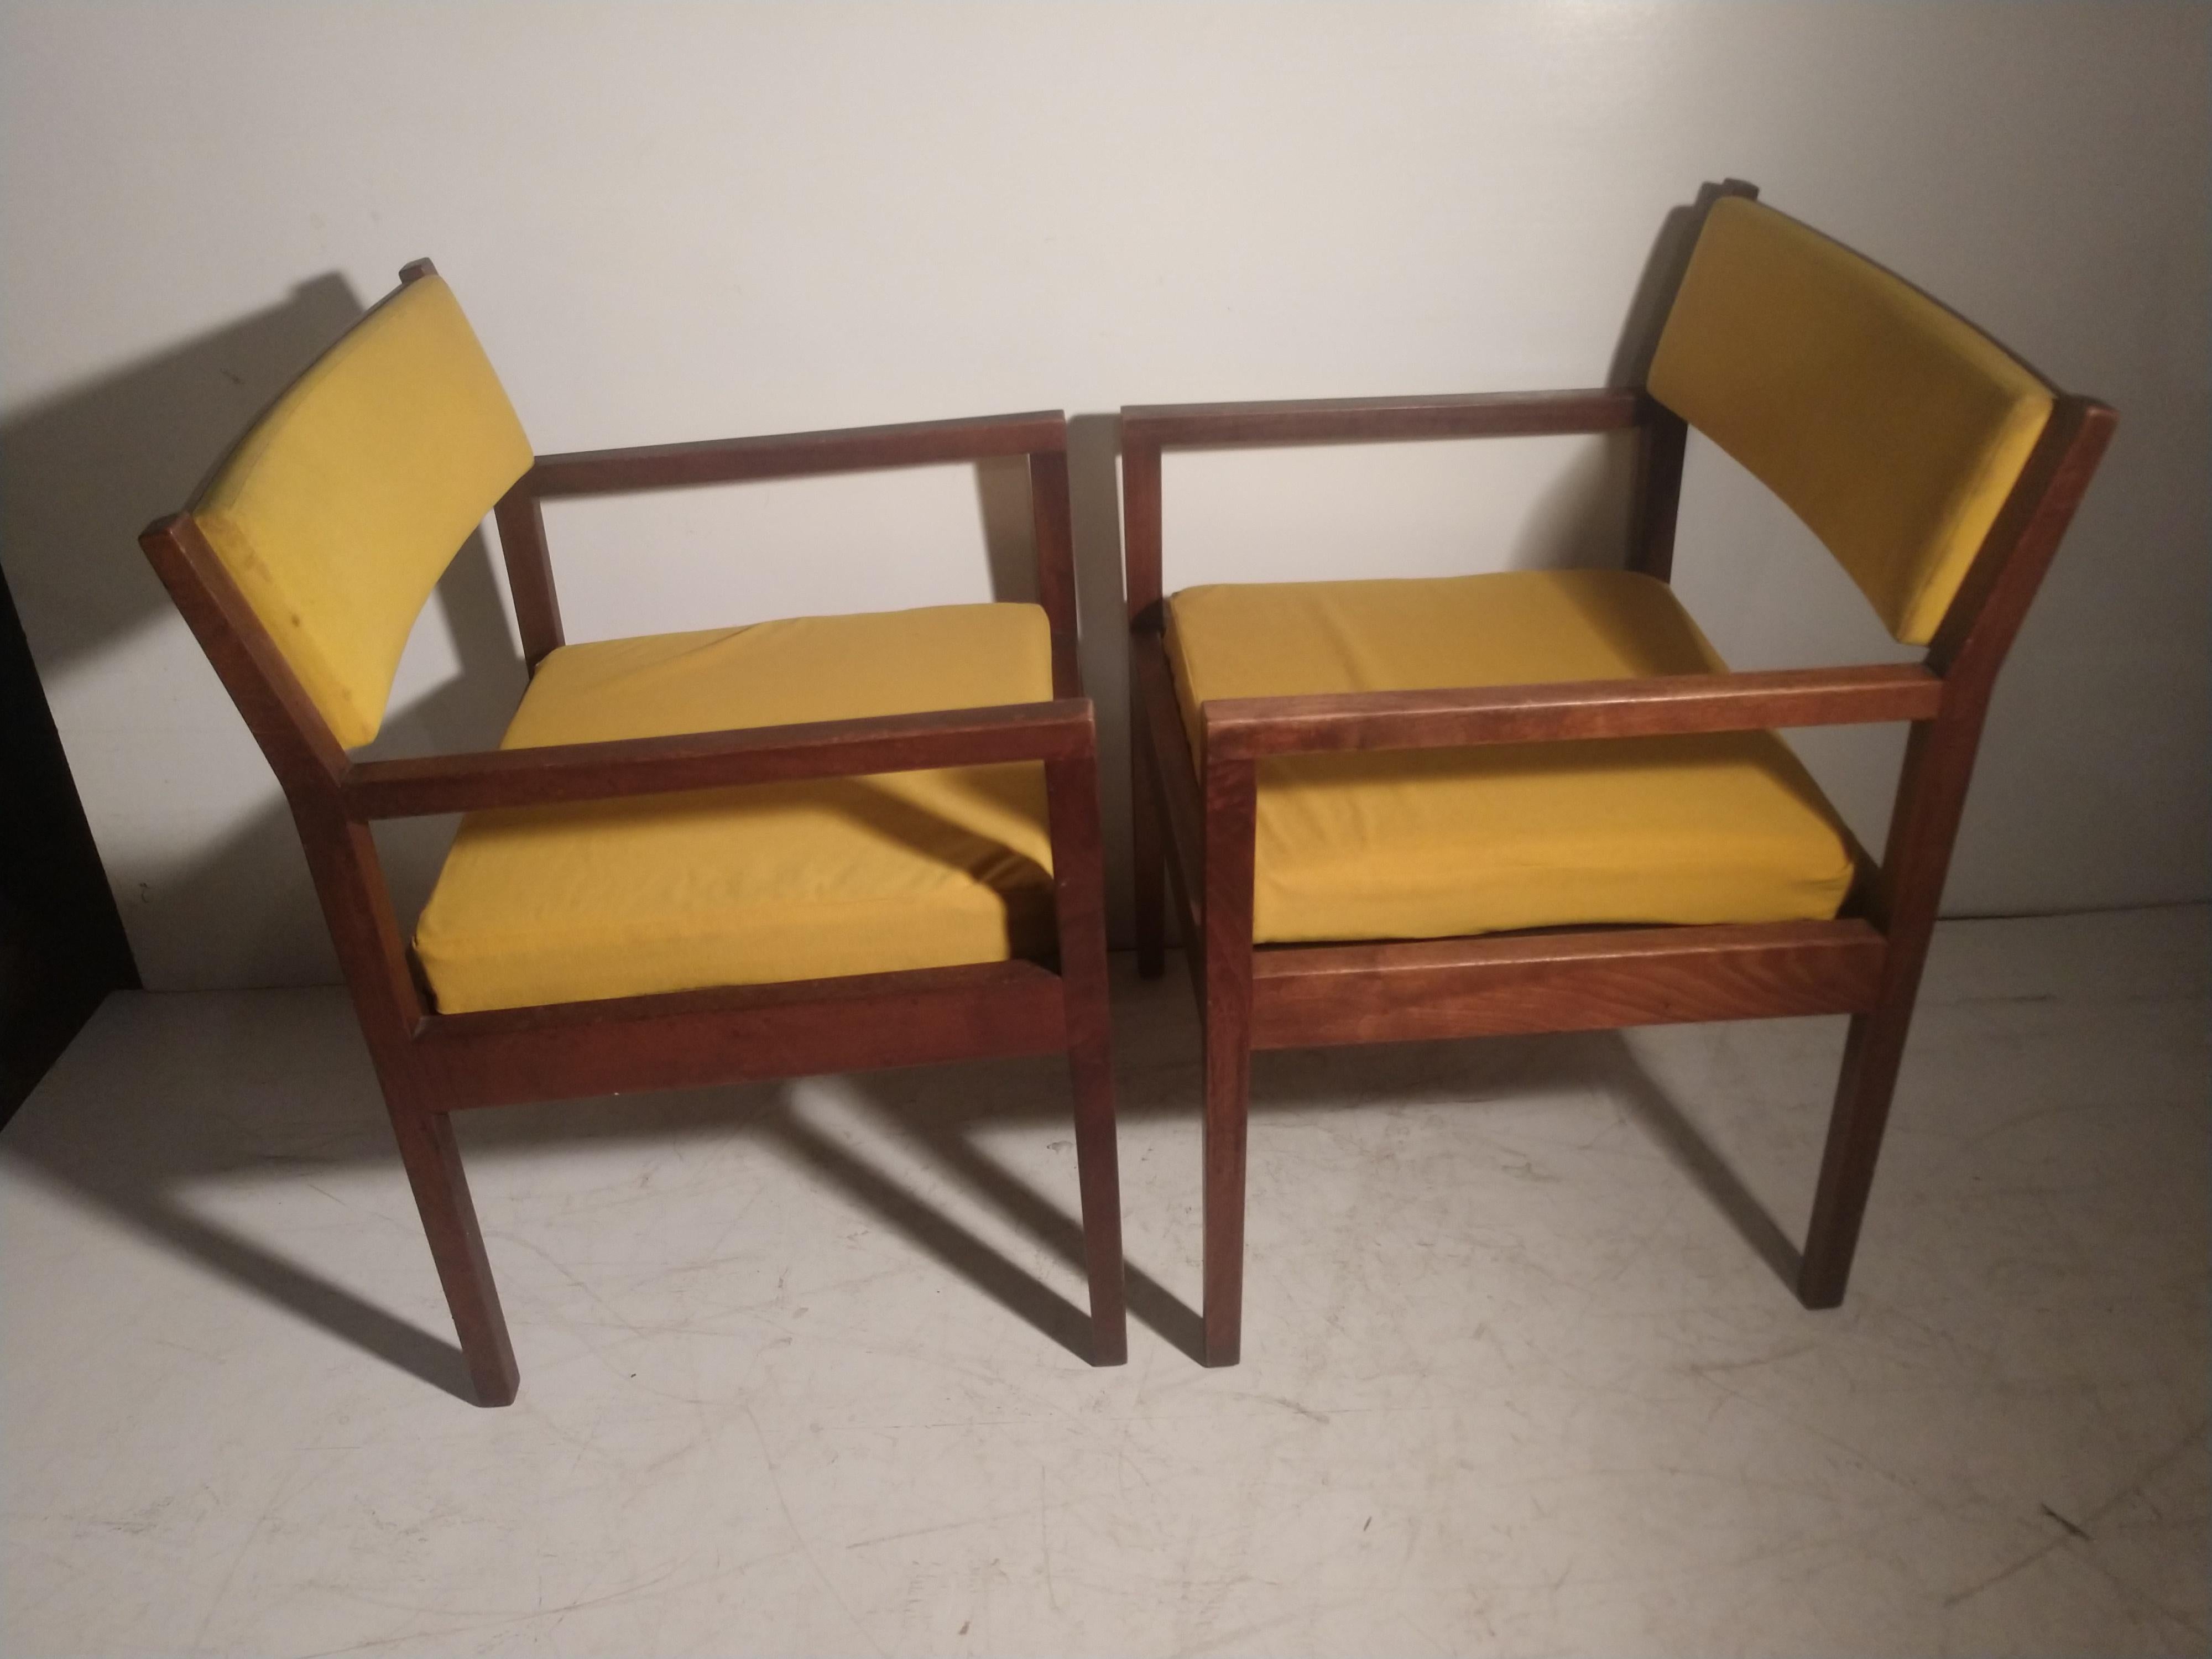 Fabric Pair of Mid-Century Modern Walnut Armchairs by George Nelson for Herman Miller